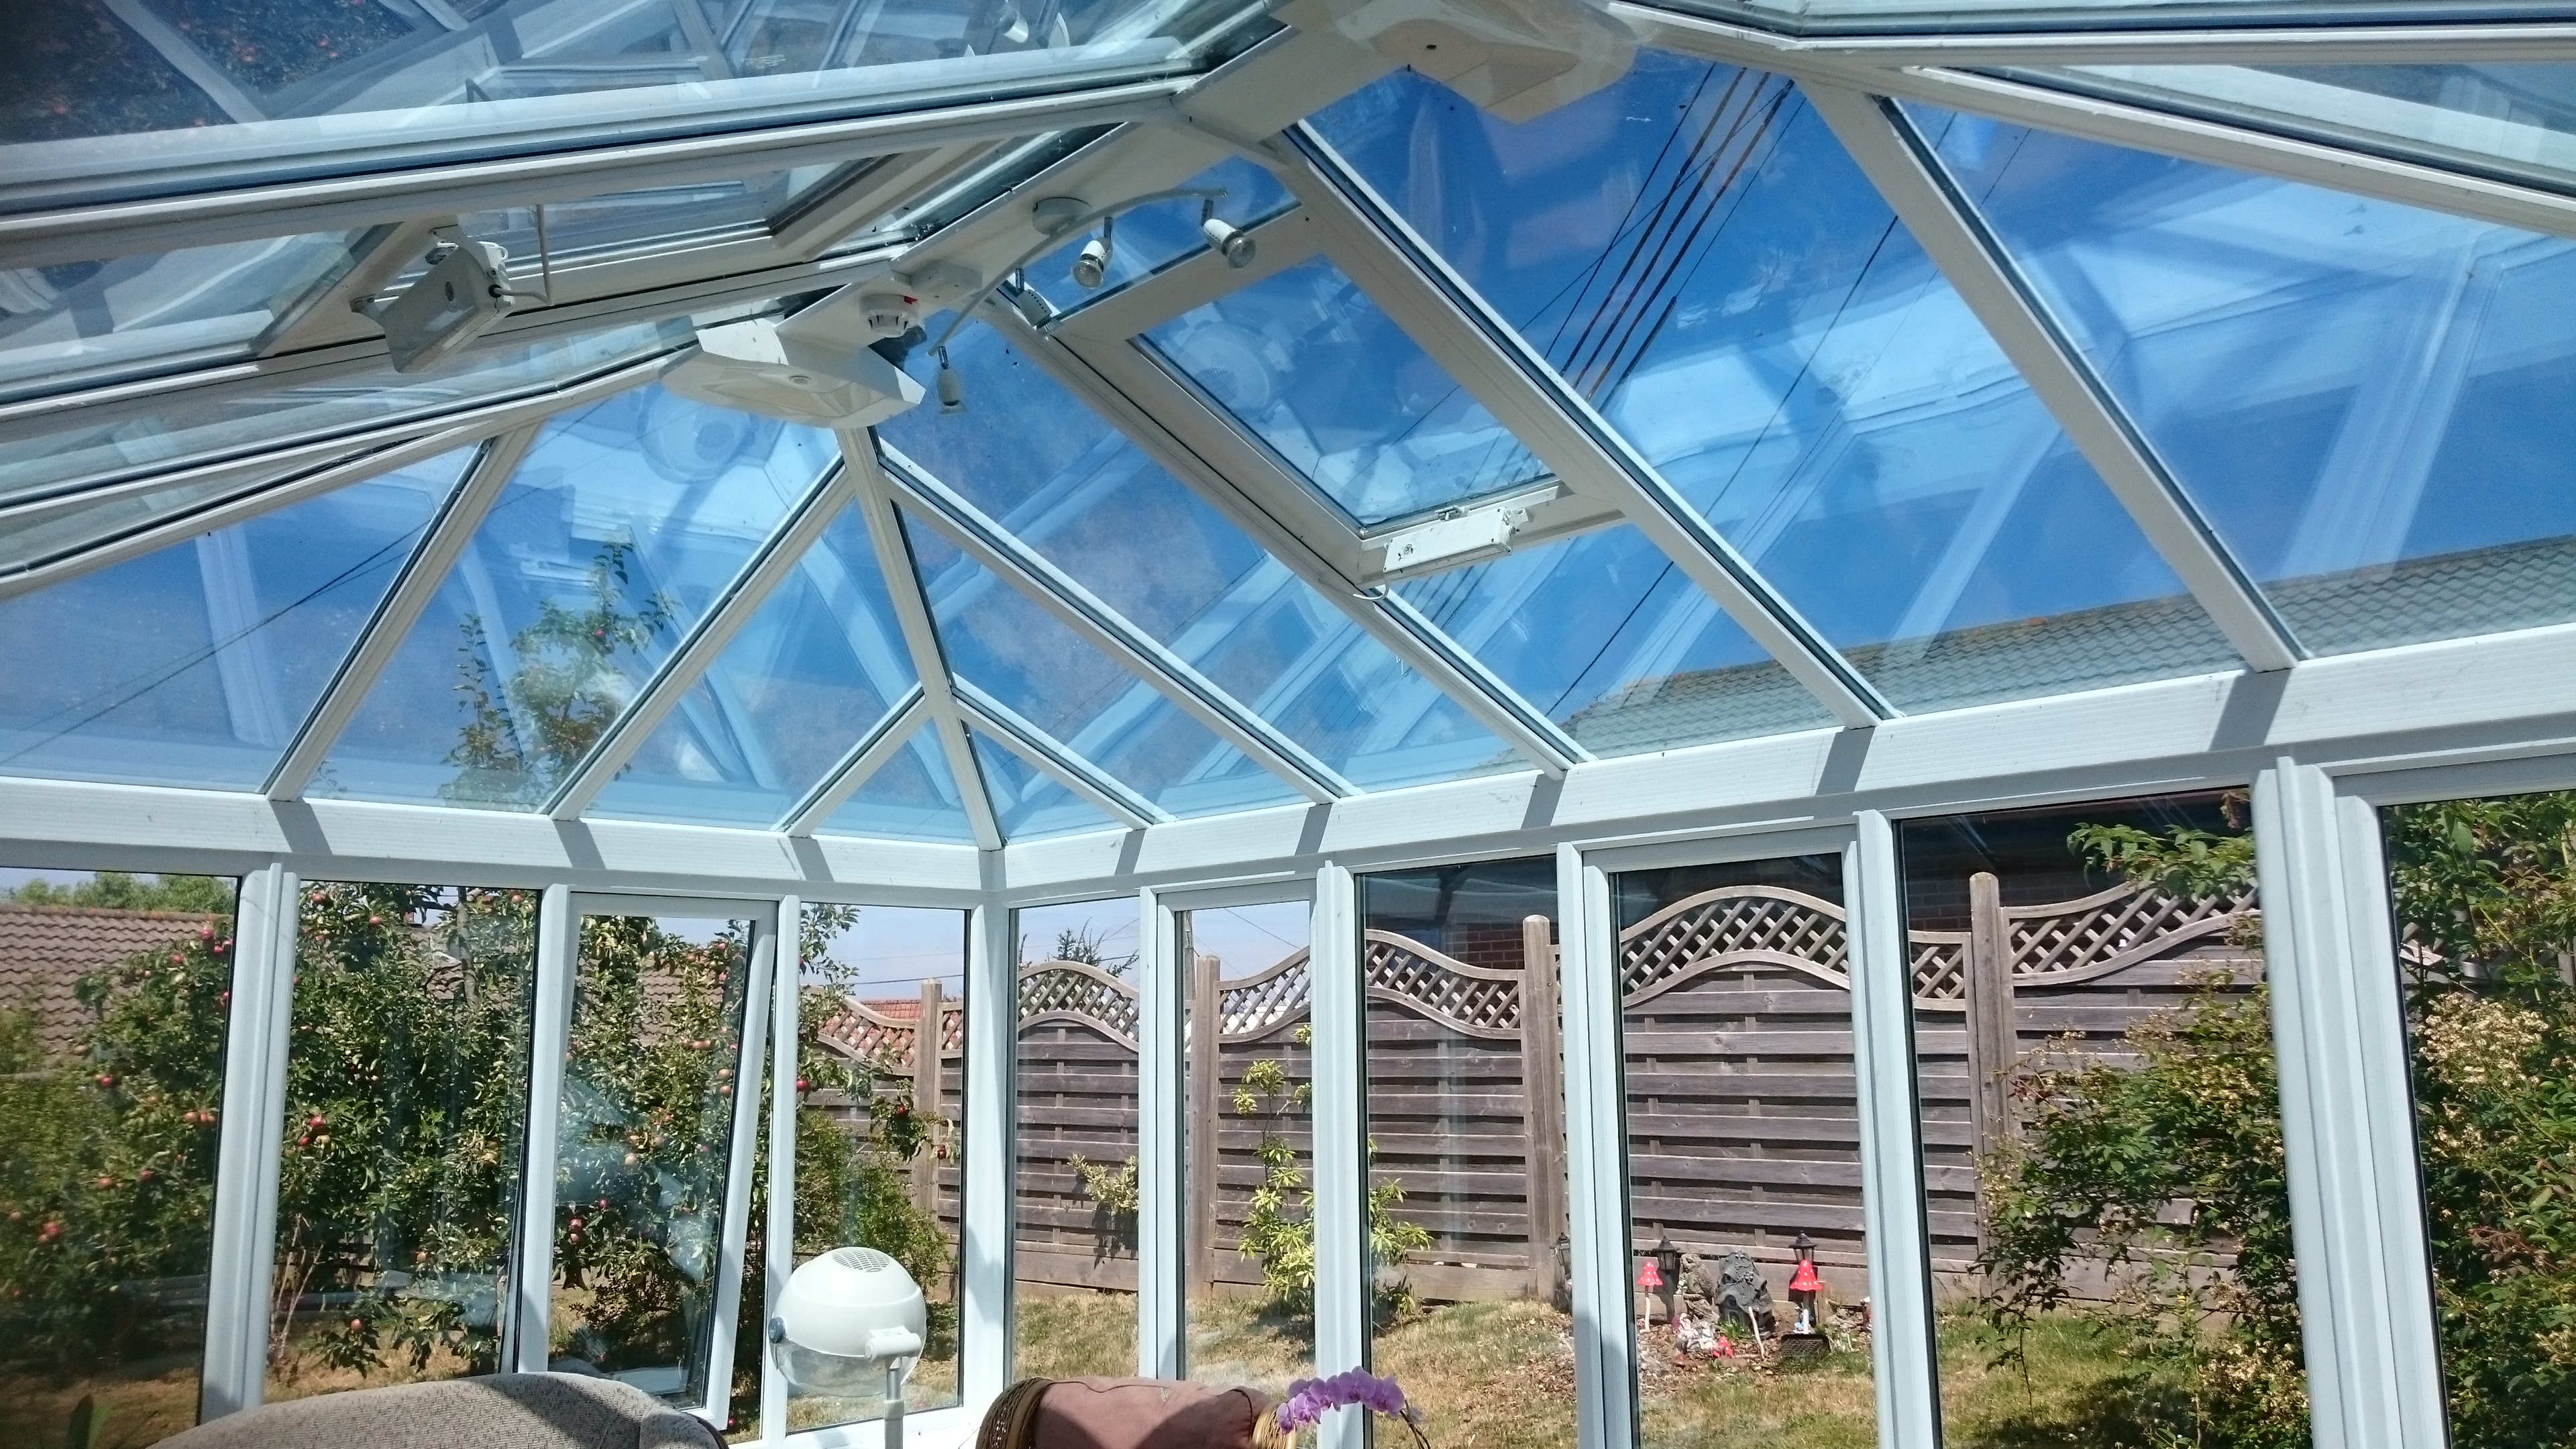 Active glass roof fitted with our Dual 20V solar window film. Tinting Express 2018